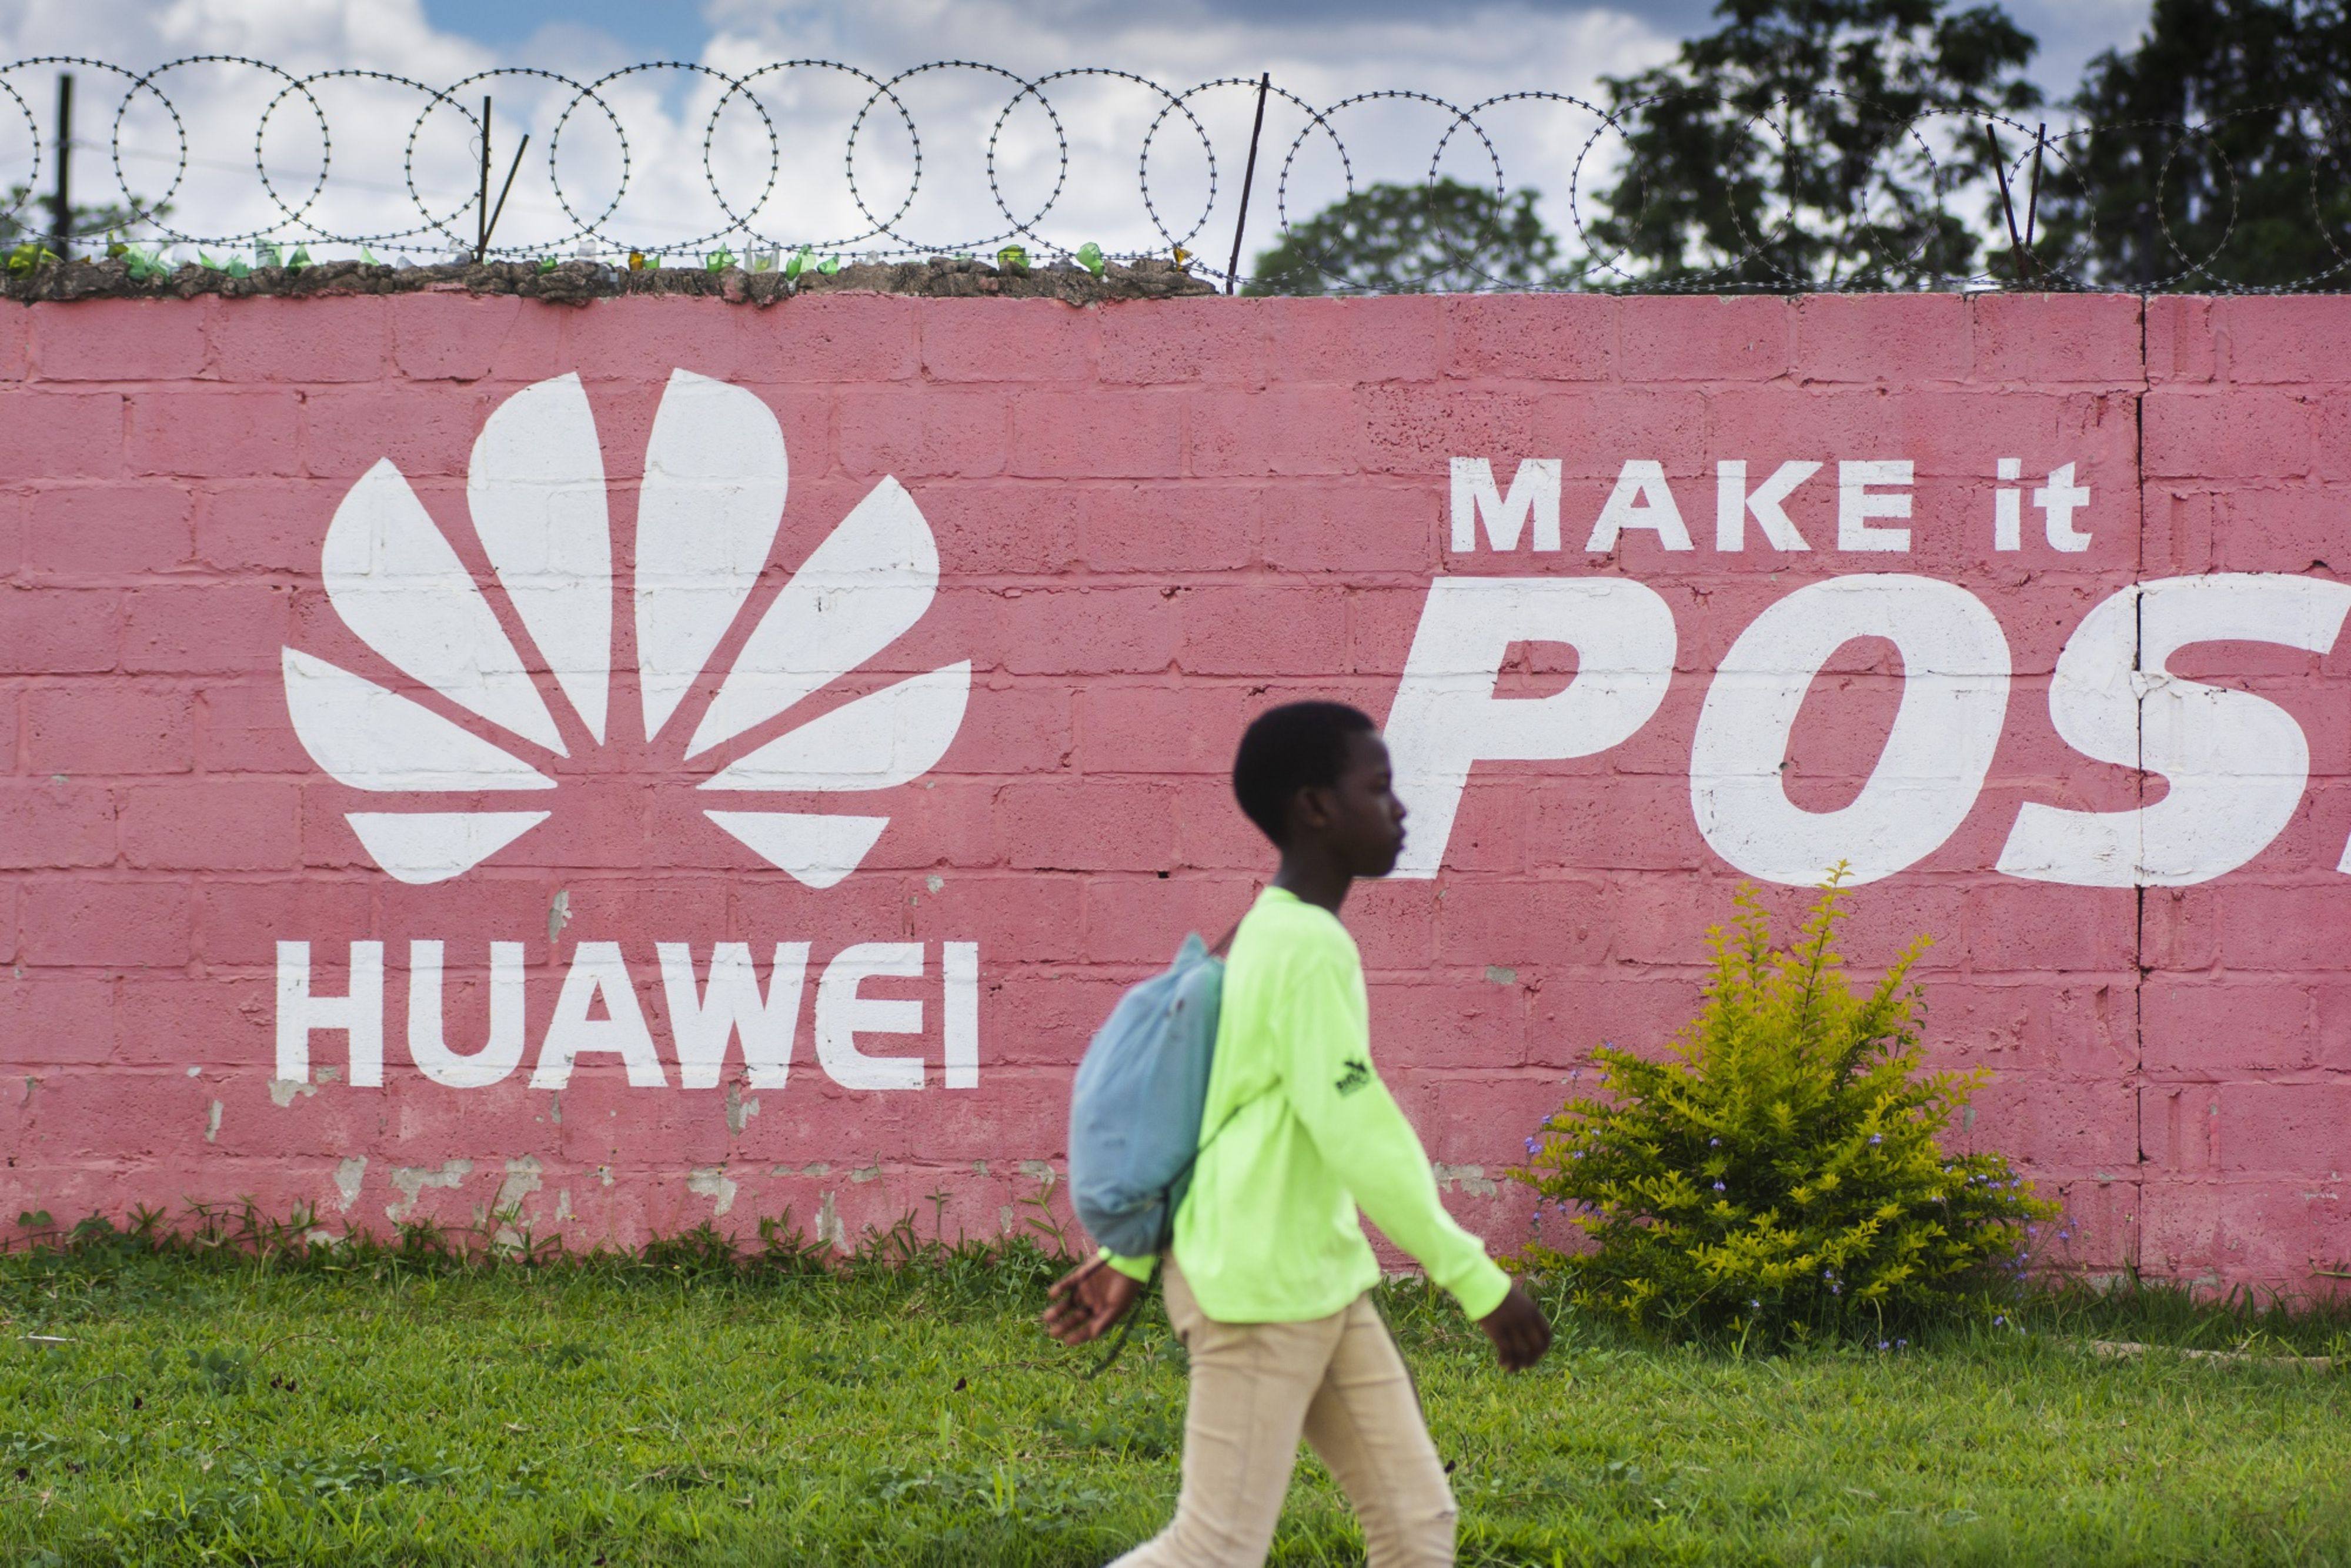 A boy passes a Huawei mural painted on a wall in Lusaka, Zambia, in December 2018. An additional 15 million jobs will be required by 2025 to reduce unemployment across the African continent. Photo: Bloomberg